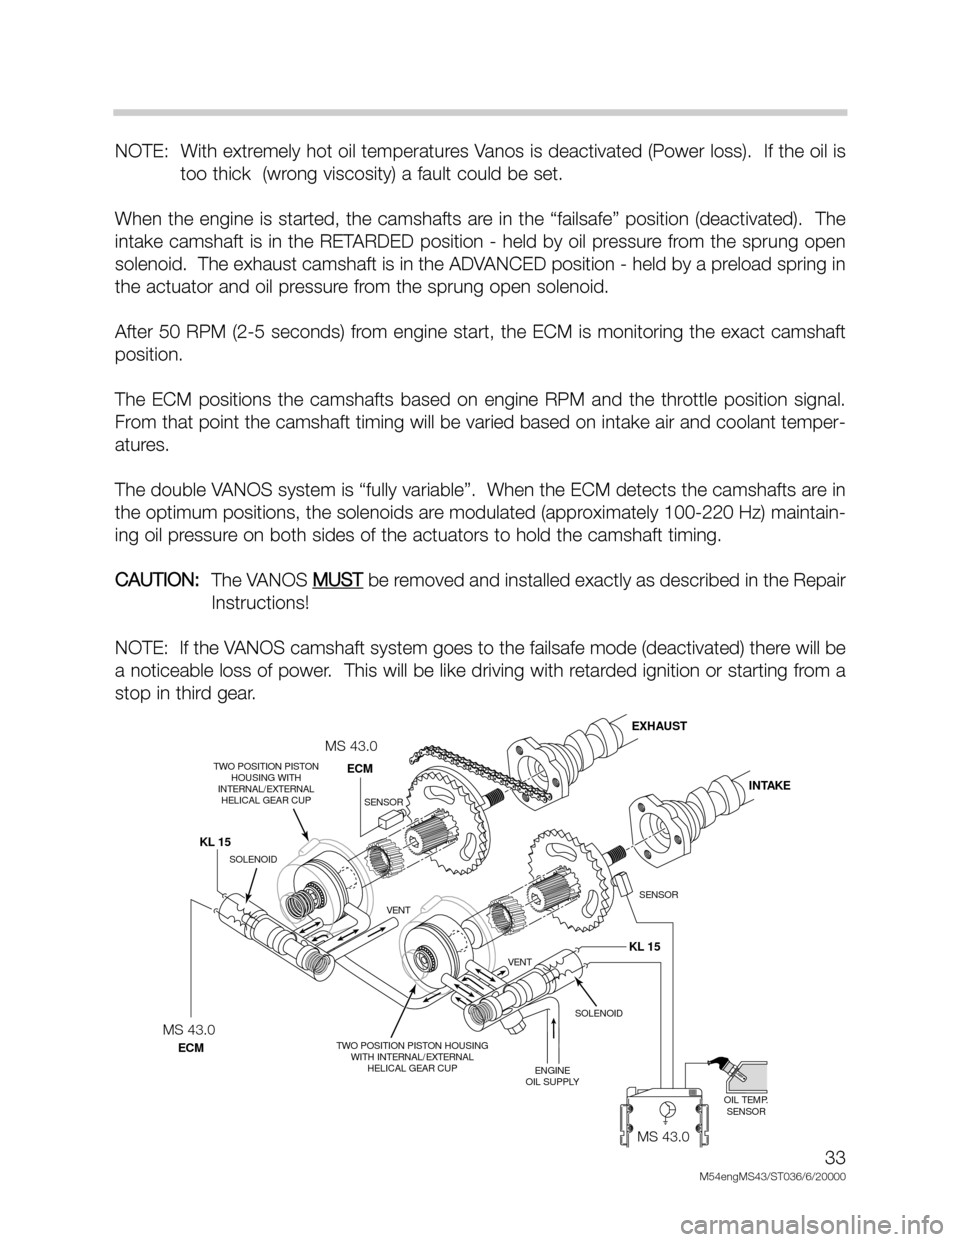 BMW X5 2001 E53 M54 Engine Workshop Manual 33
M54engMS43/ST036/6/20000
NOTE:  With extremely hot oil temperatures Vanos is deactivated (Power loss).  If the oil is
too thick  (wrong viscosity) a fault could be set.
When the engine is started, 